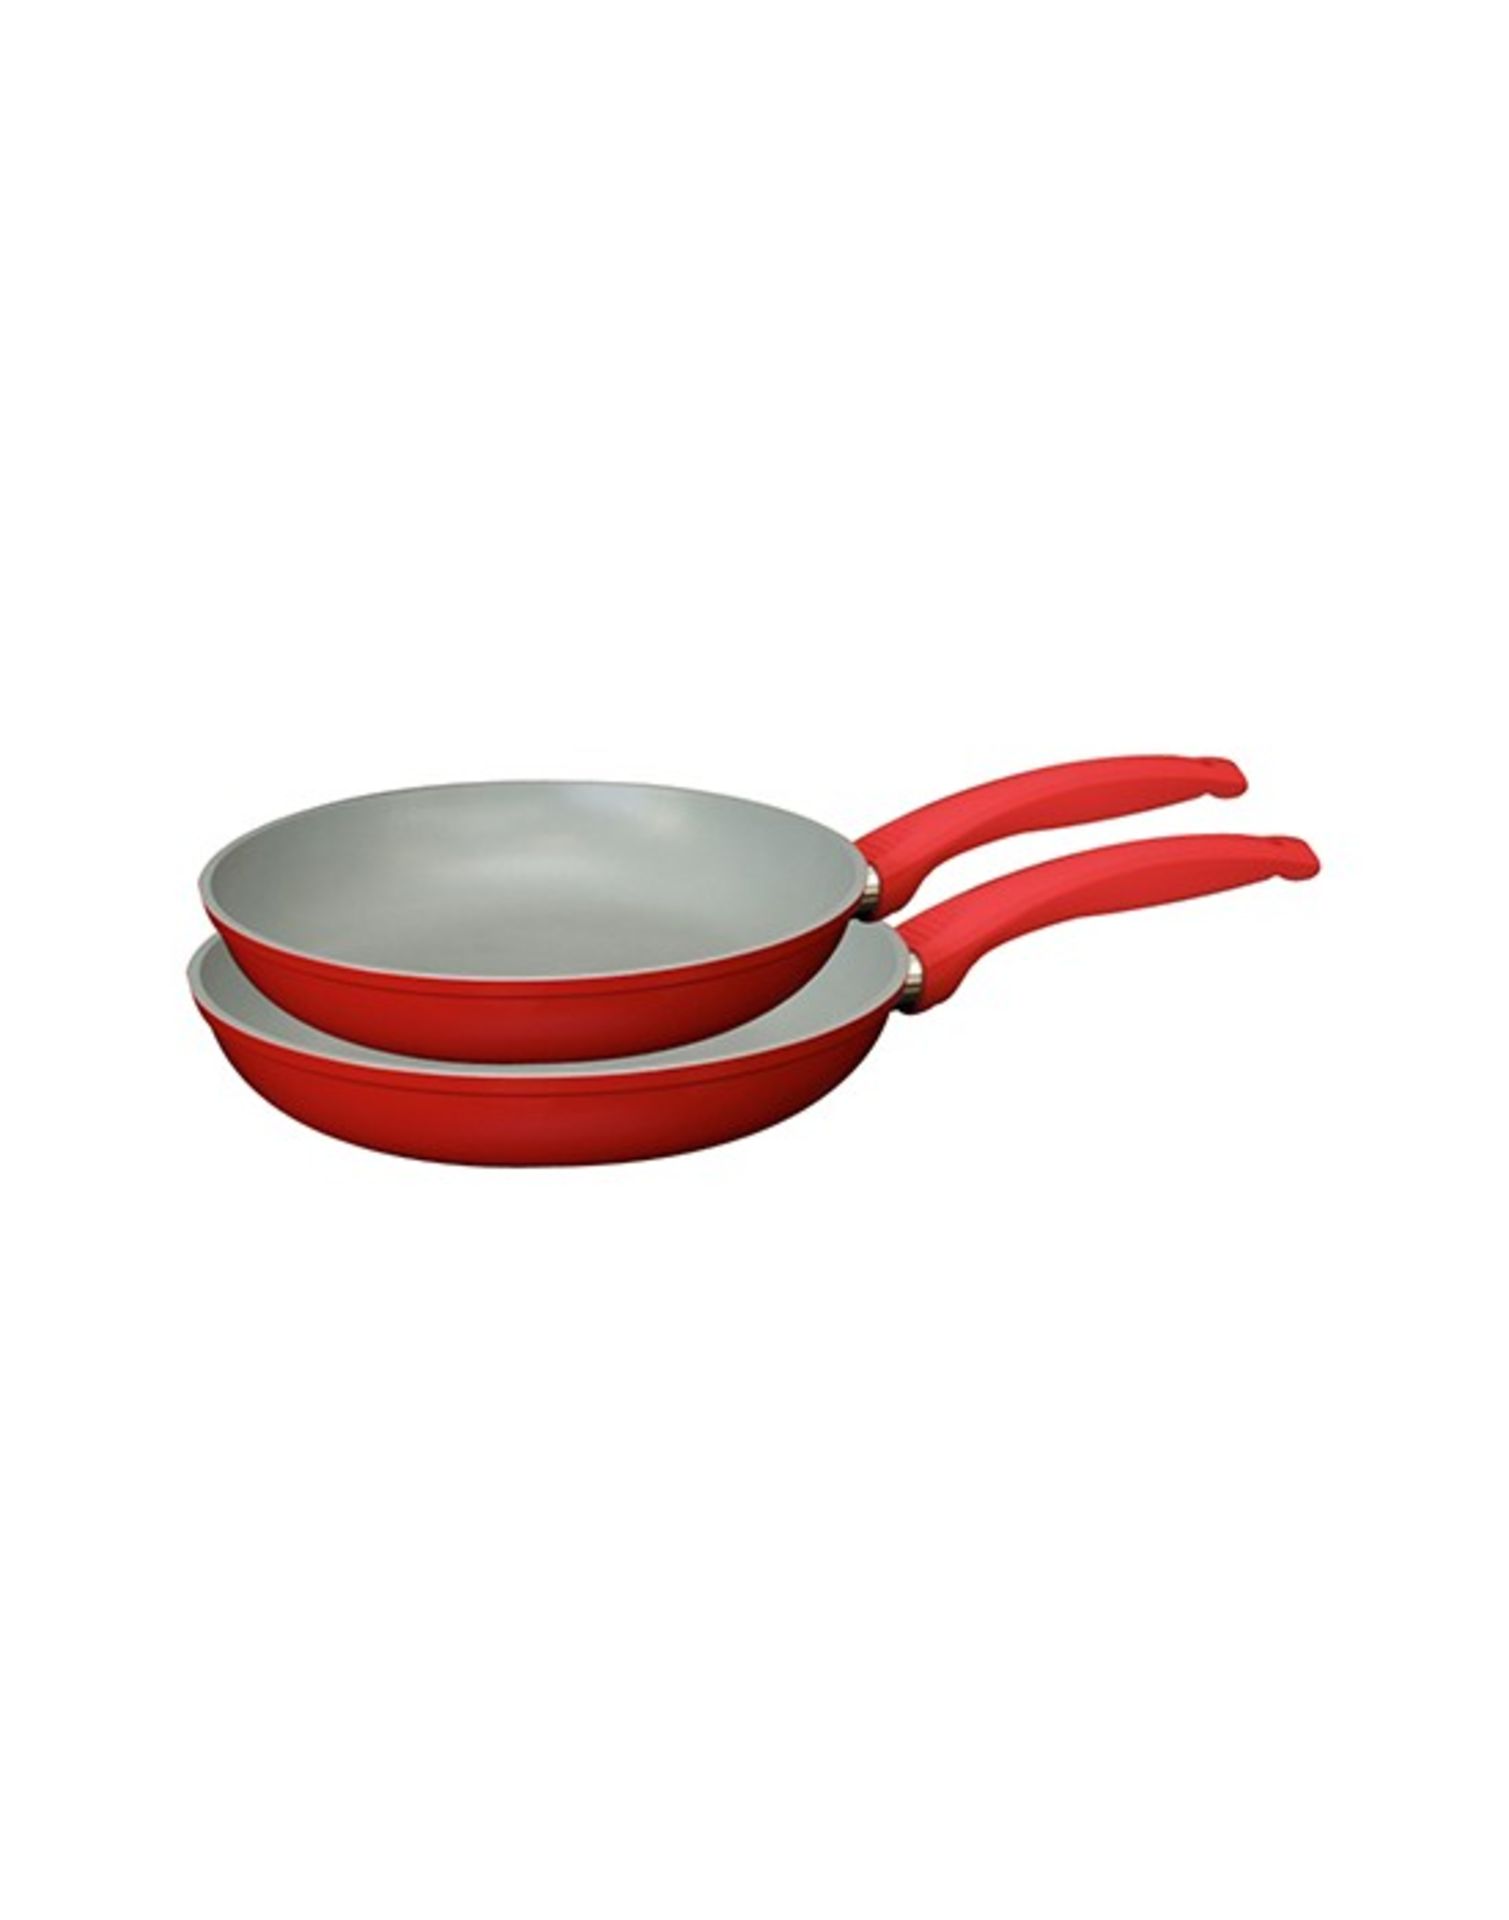 V *TRADE QTY* Brand New Set Of Two Colour Changing Frying Pans (Red) Changes Colour At Optimum